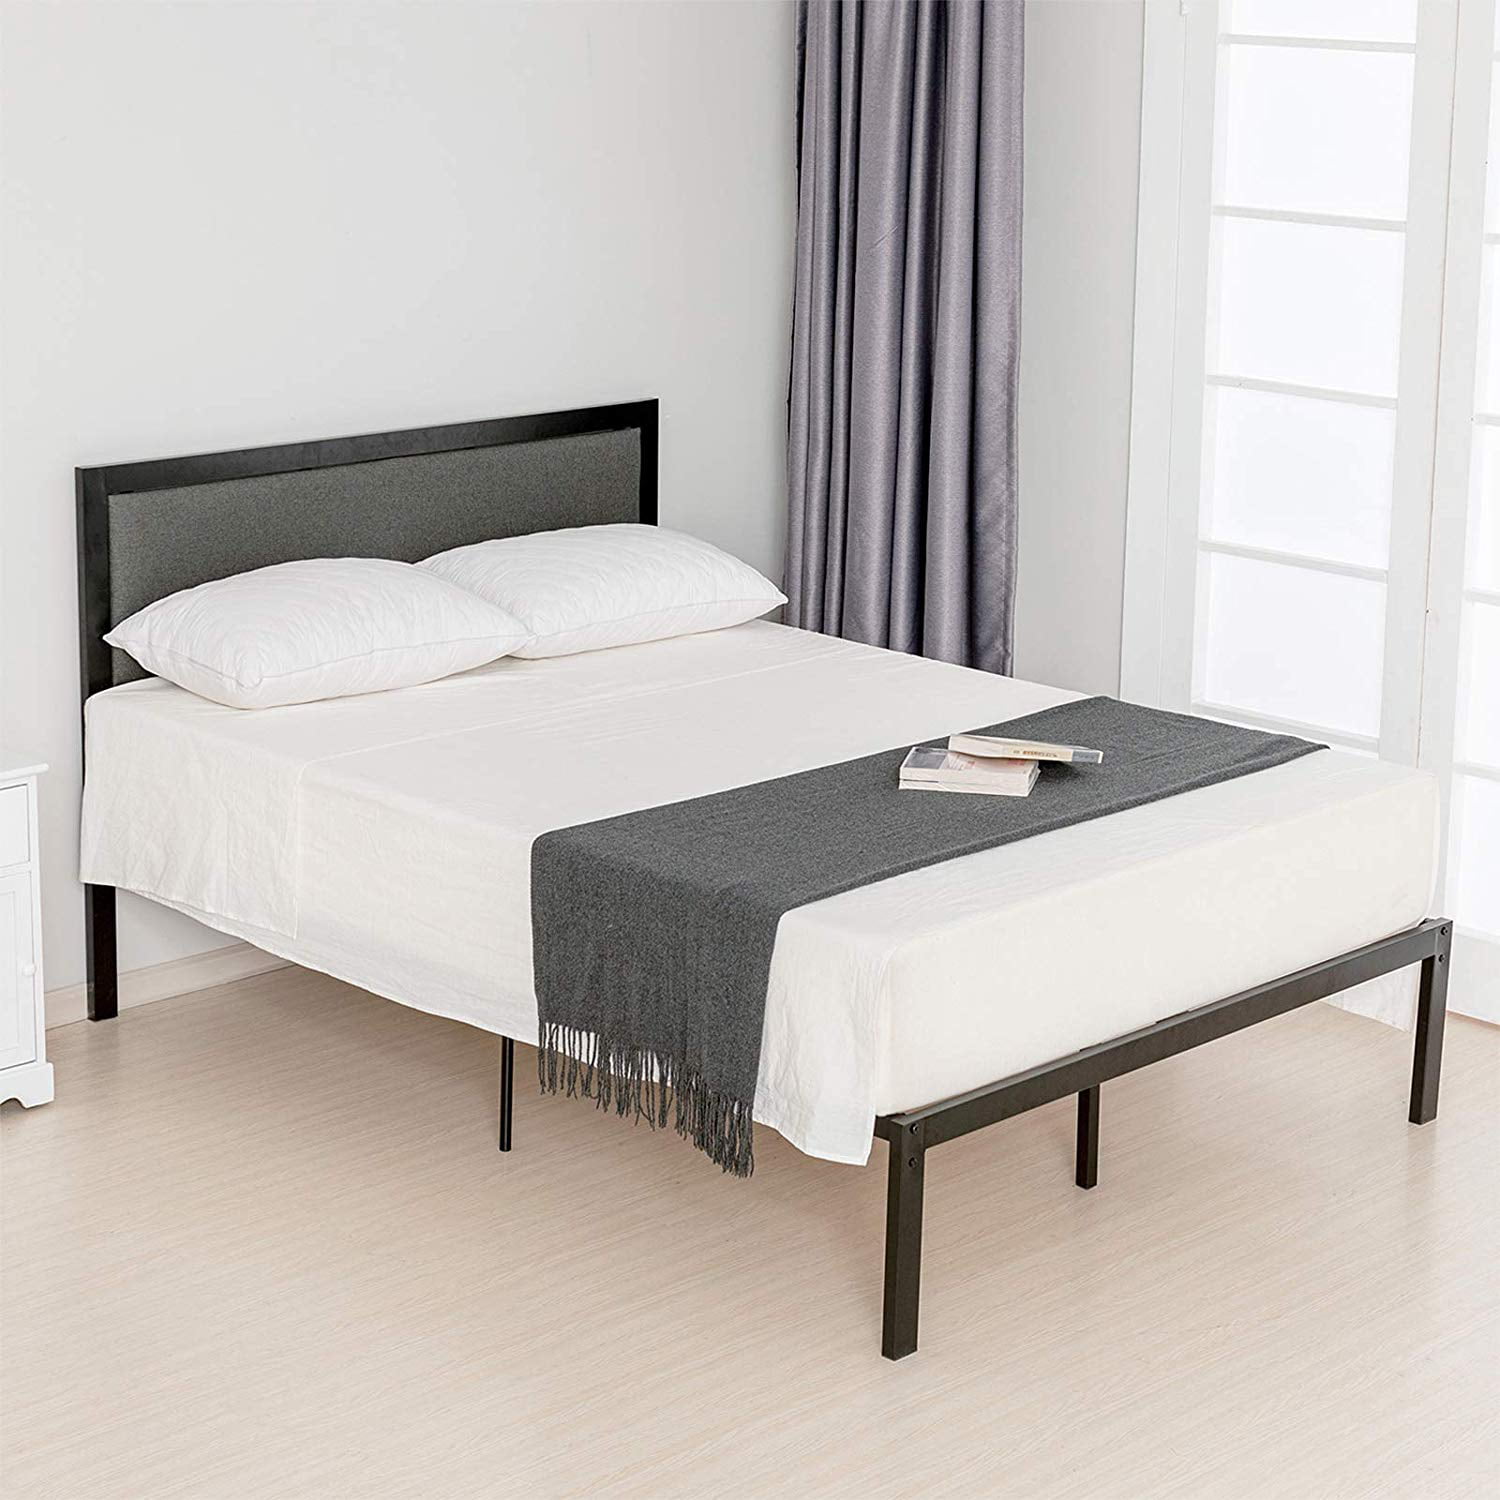 Mecor Queen Platform Bed Metal Frame - with Solid Wood Slats Support